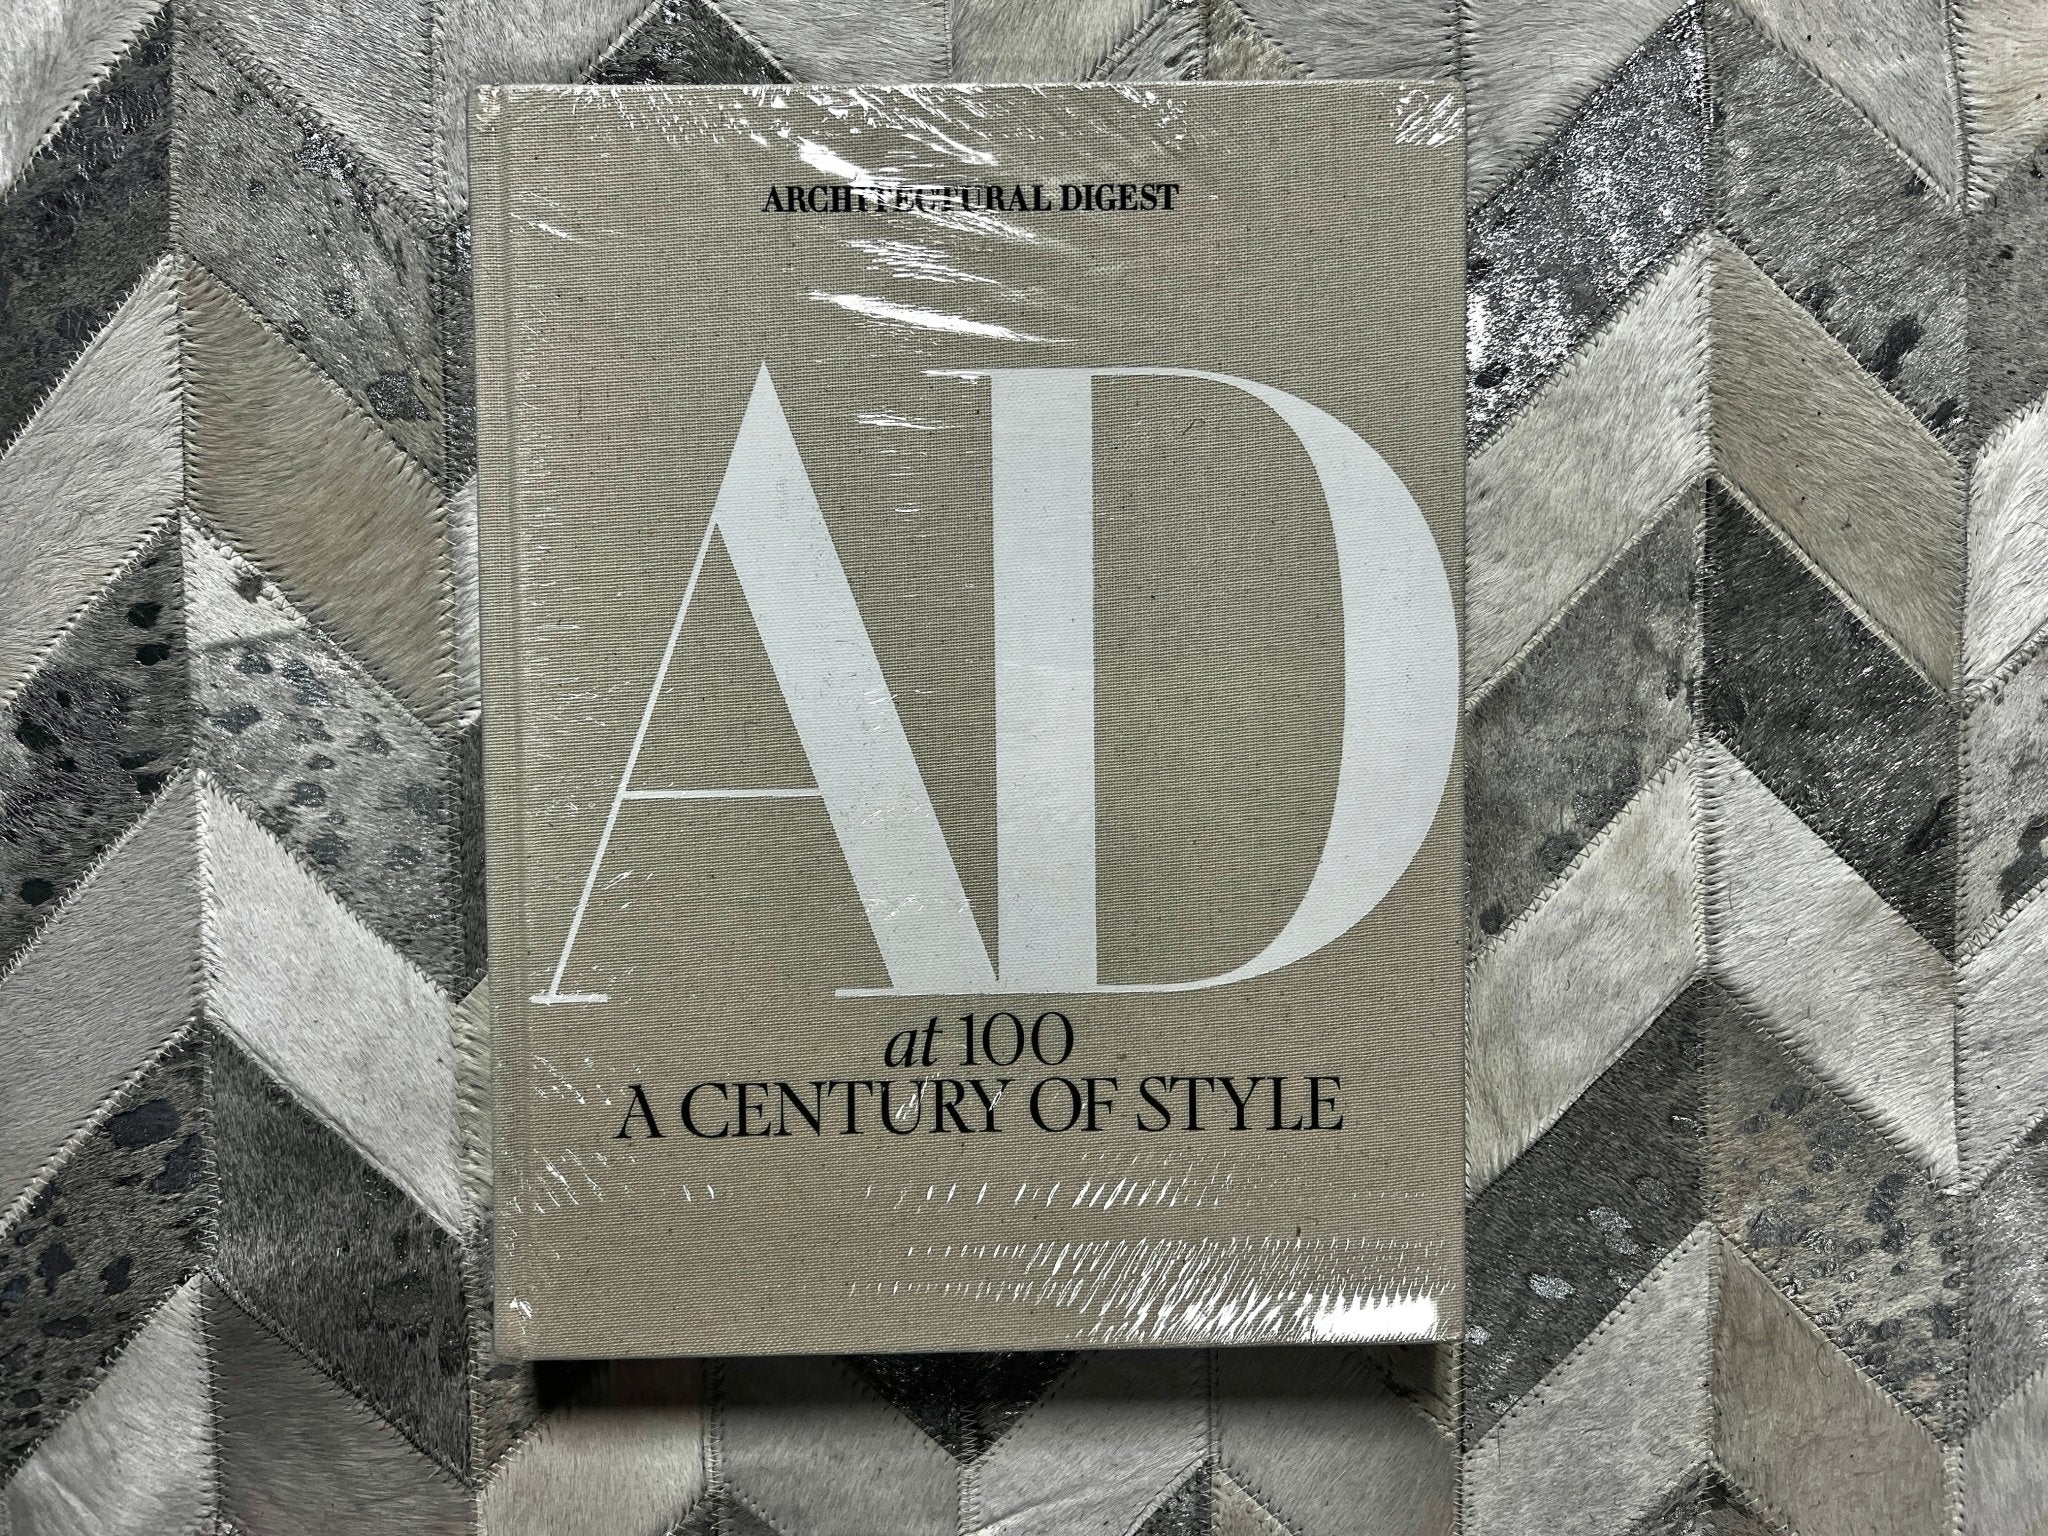 Architectural Digest at 100 Designer Coffee Table Book | Banana Manor Rug Company